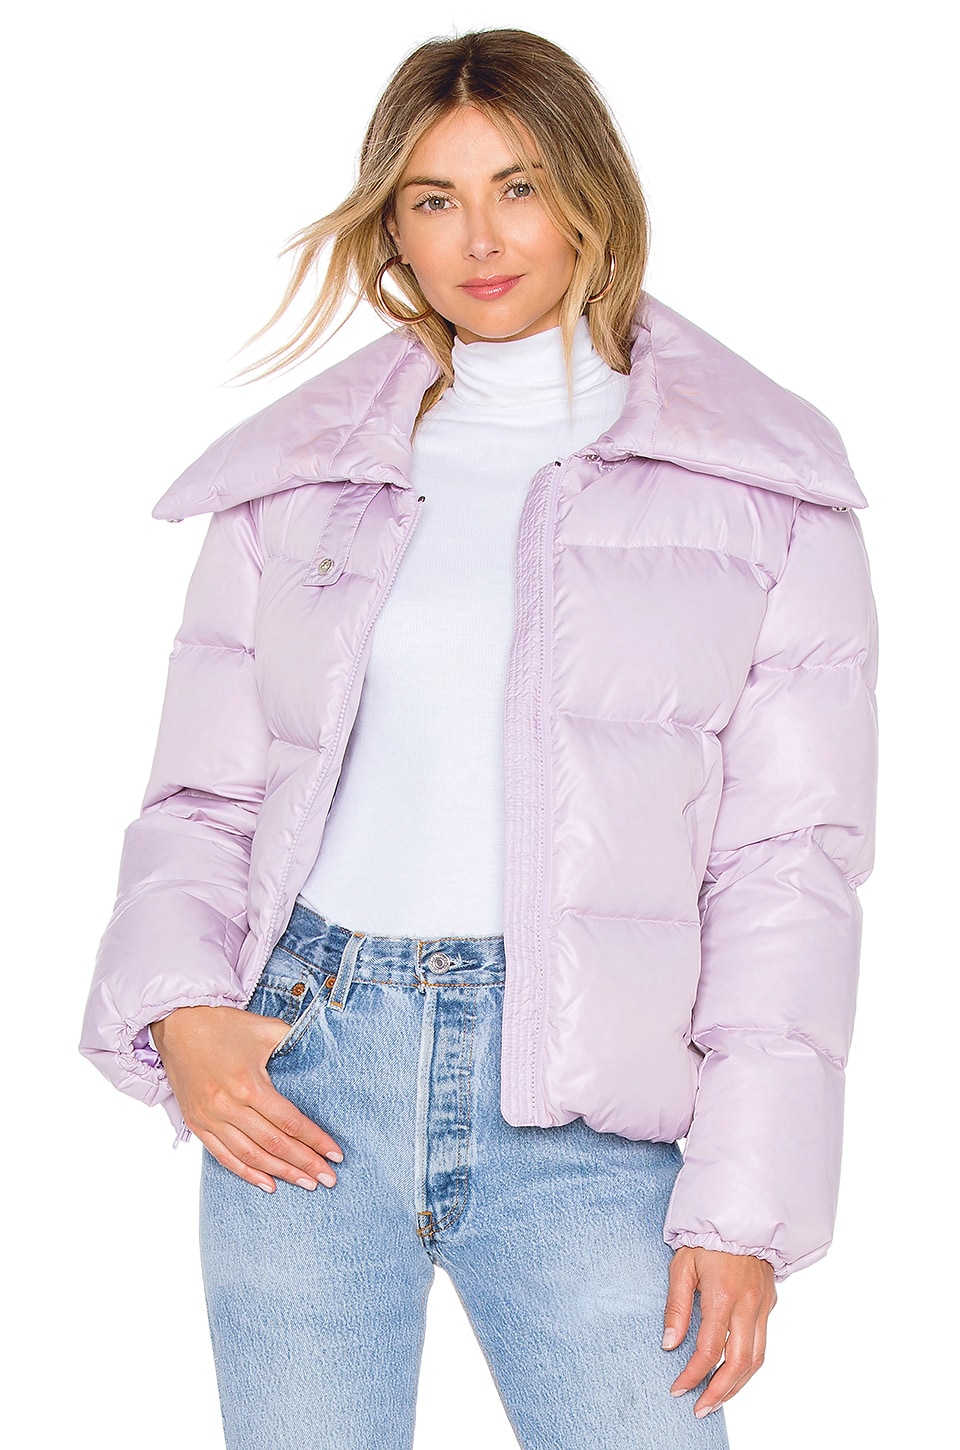 KENDALL + KYLIE Puffer Jacket in Lilac | REVOLVE